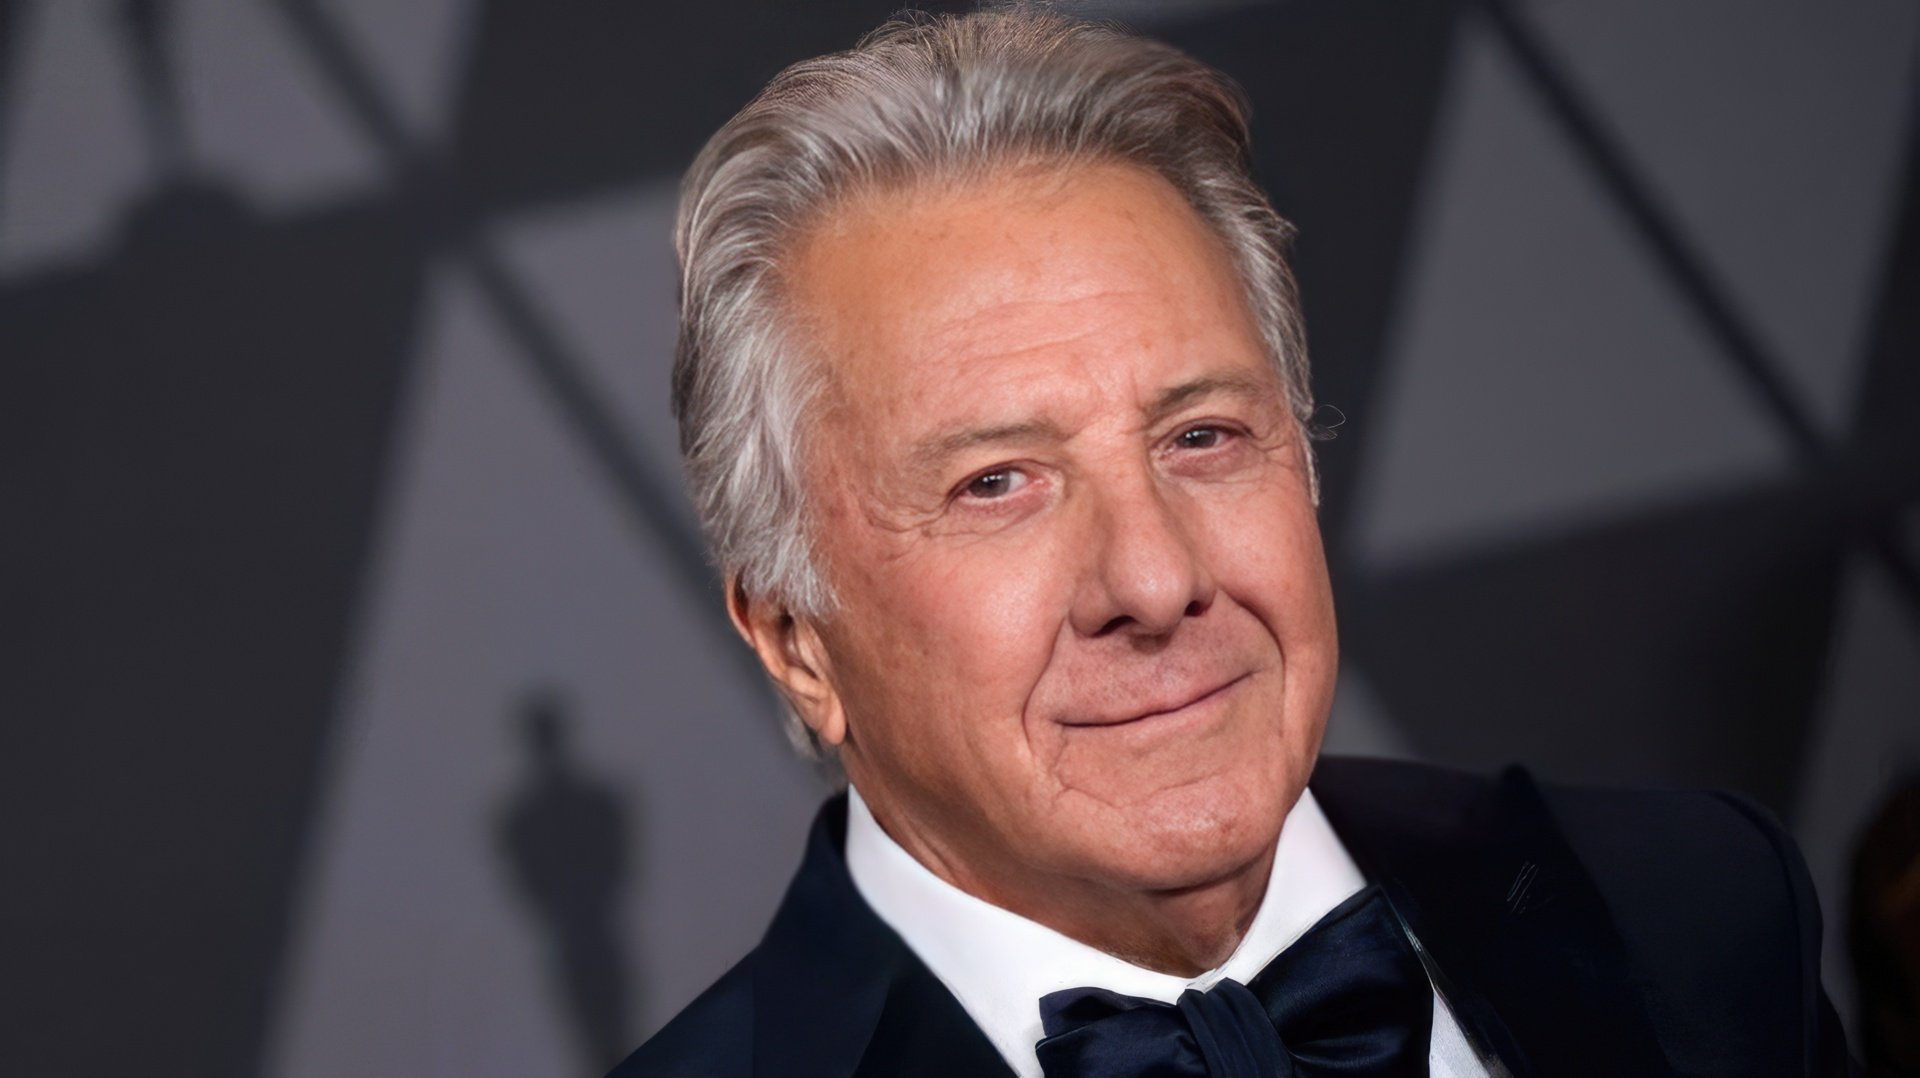 Dustin Hoffman continues to act in films